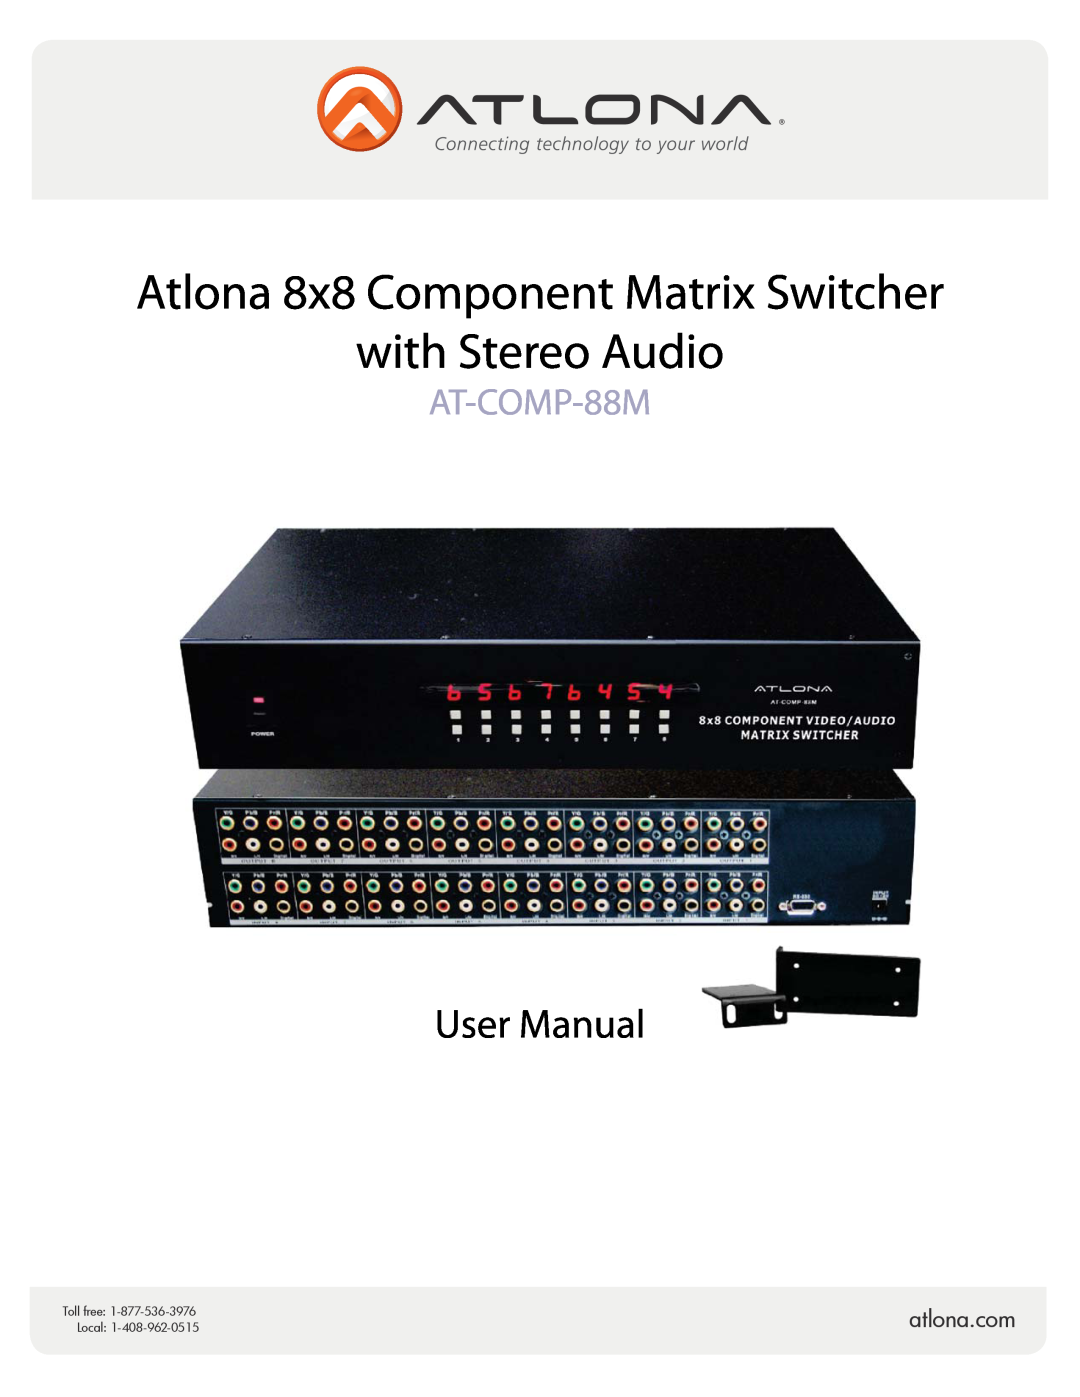 Atlona AT-COMP-88M user manual atlona.com, Atlona 8x8 Component Matrix Switcher with Stereo Audio, Toll free, Local 